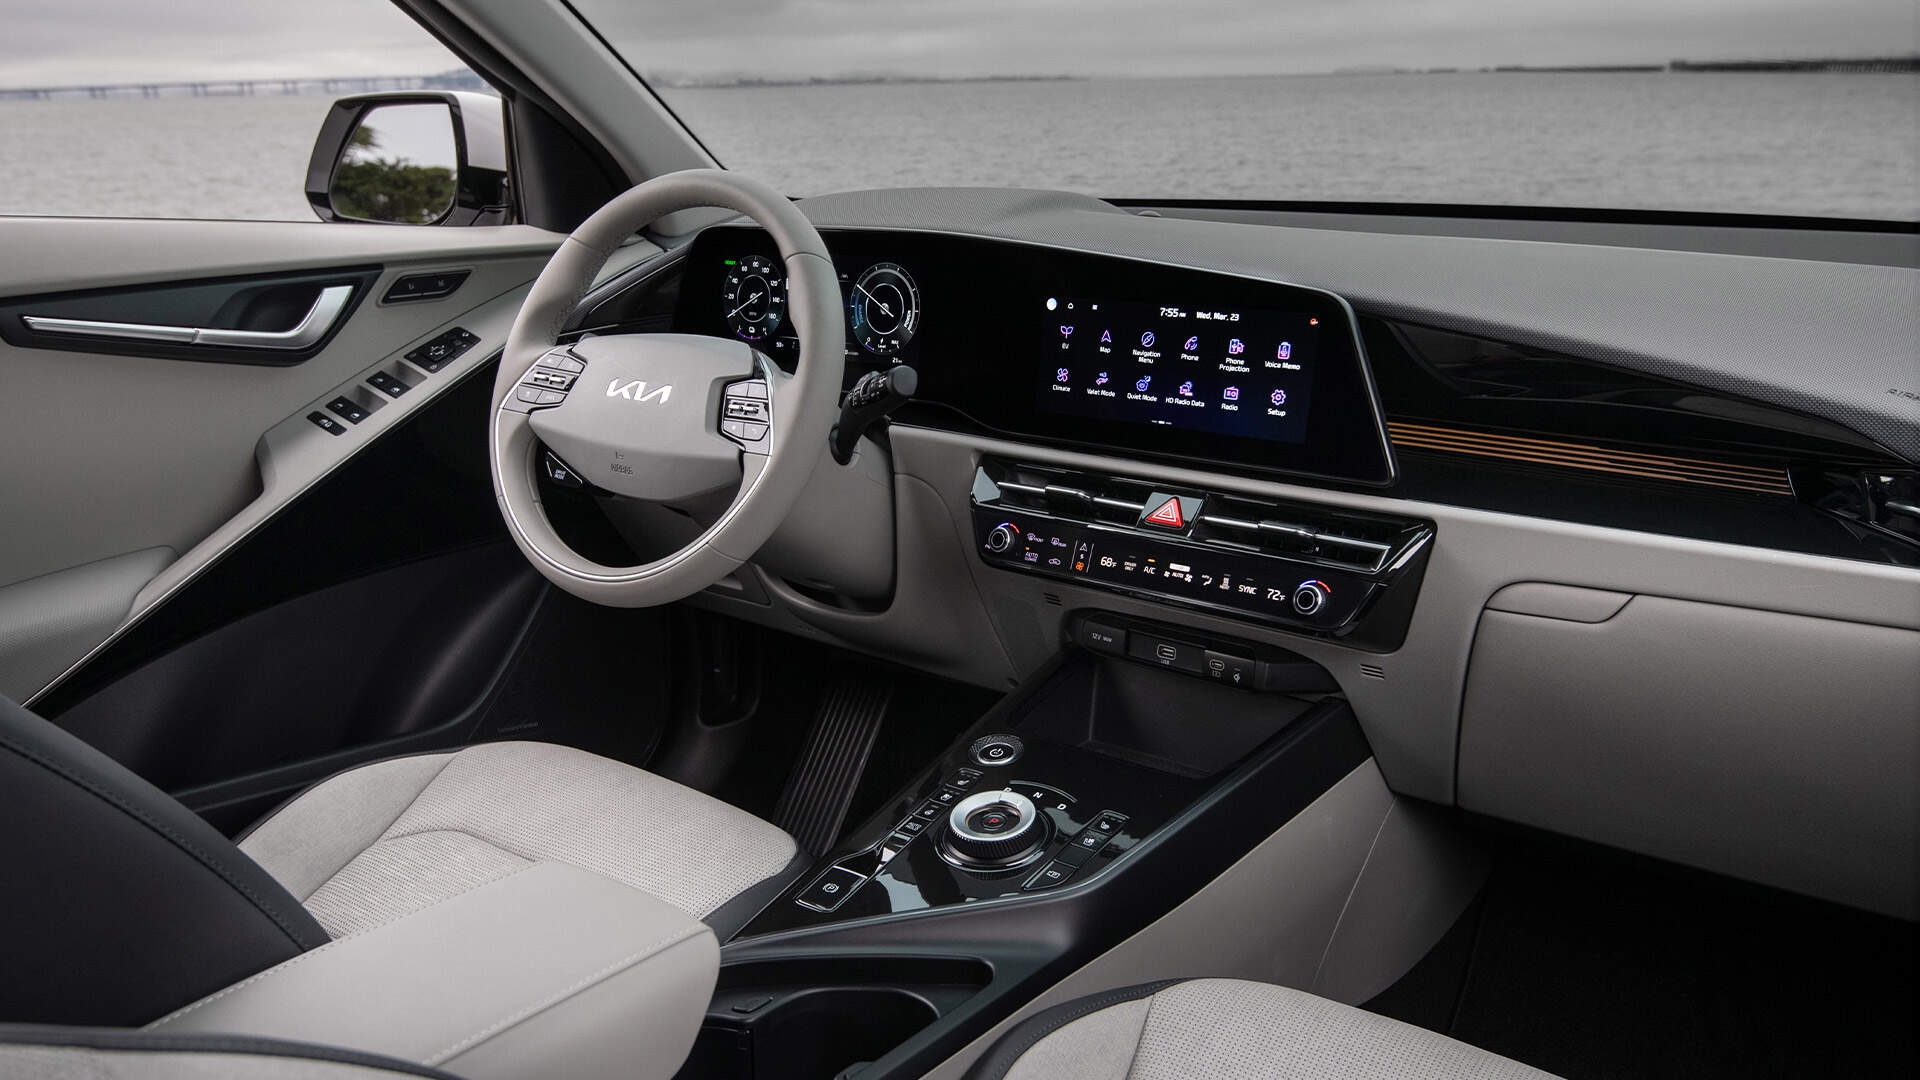 Interior of a Kia vehicle, showing the dashboard with a large display